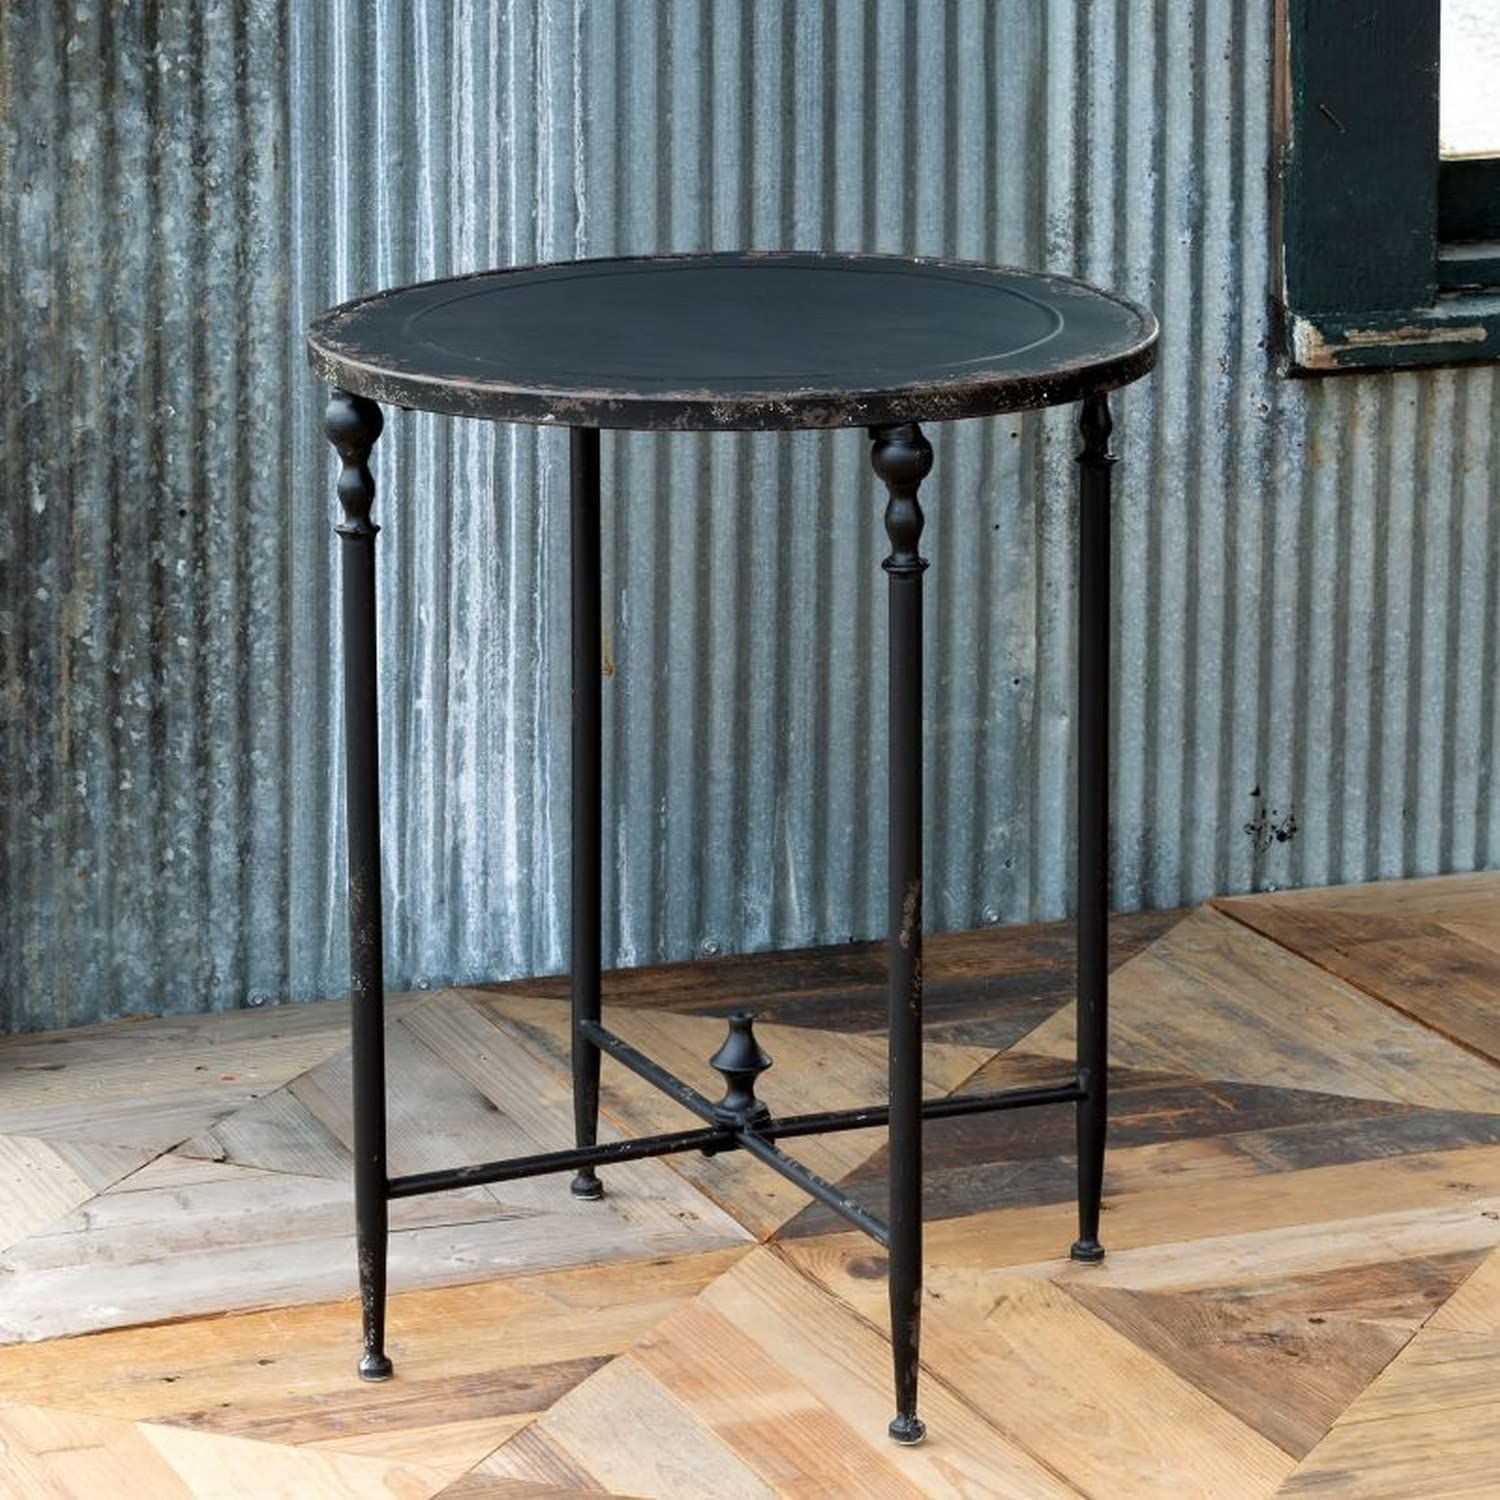 Park Hill Collections EFT00153 Antique Black Round Side Table, 24-inch Height, Metal | Amazon (US)